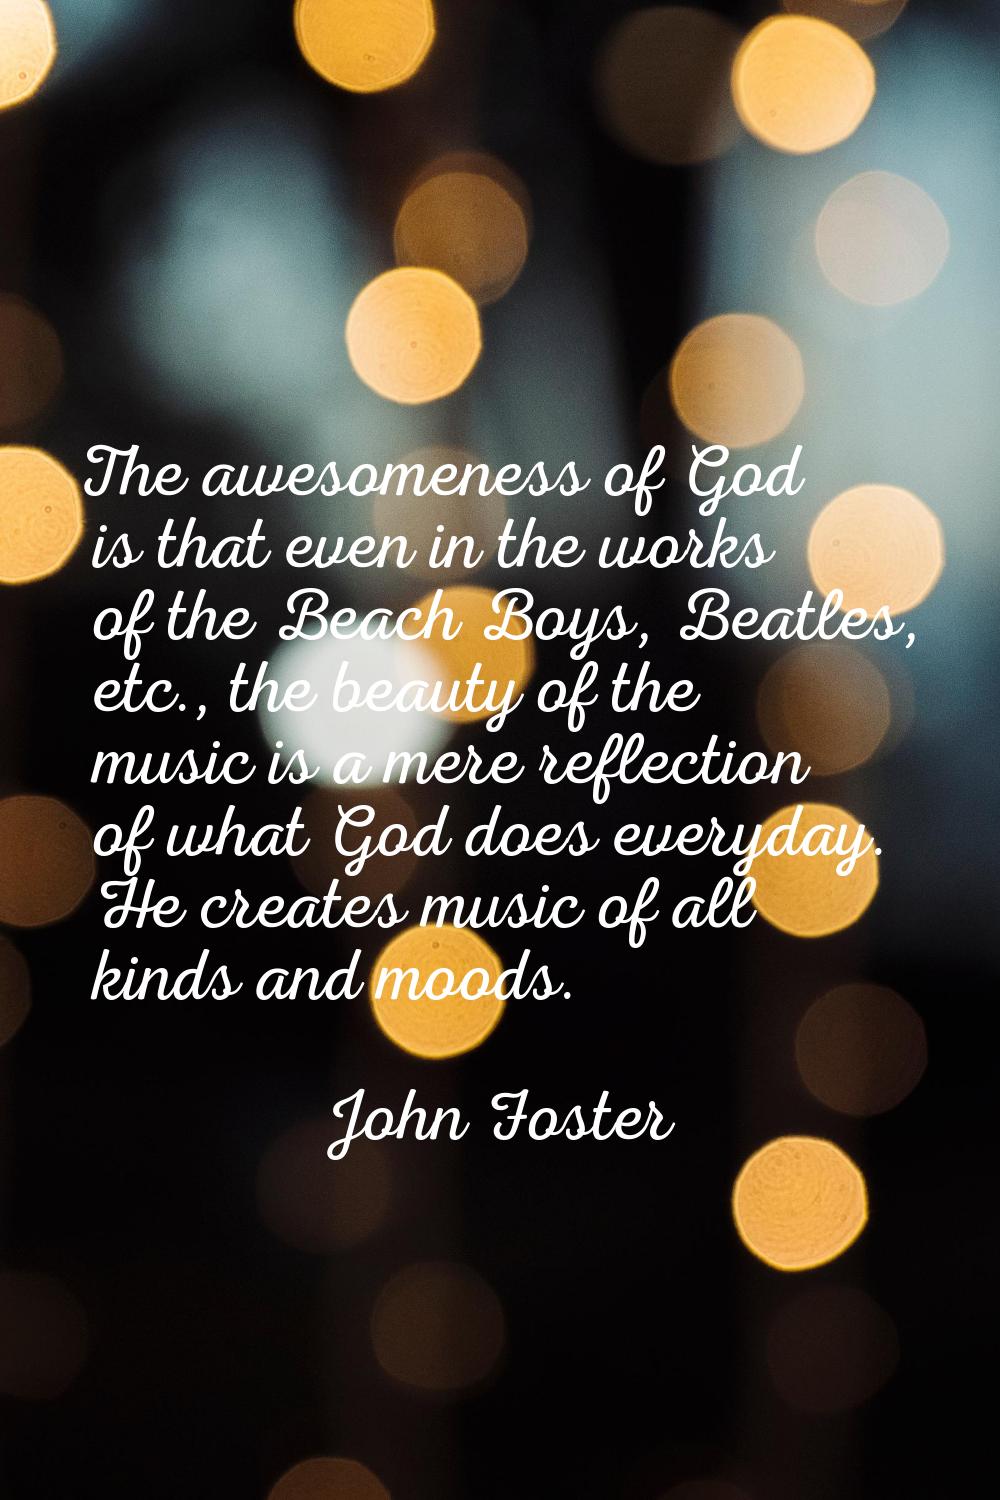 The awesomeness of God is that even in the works of the Beach Boys, Beatles, etc., the beauty of th